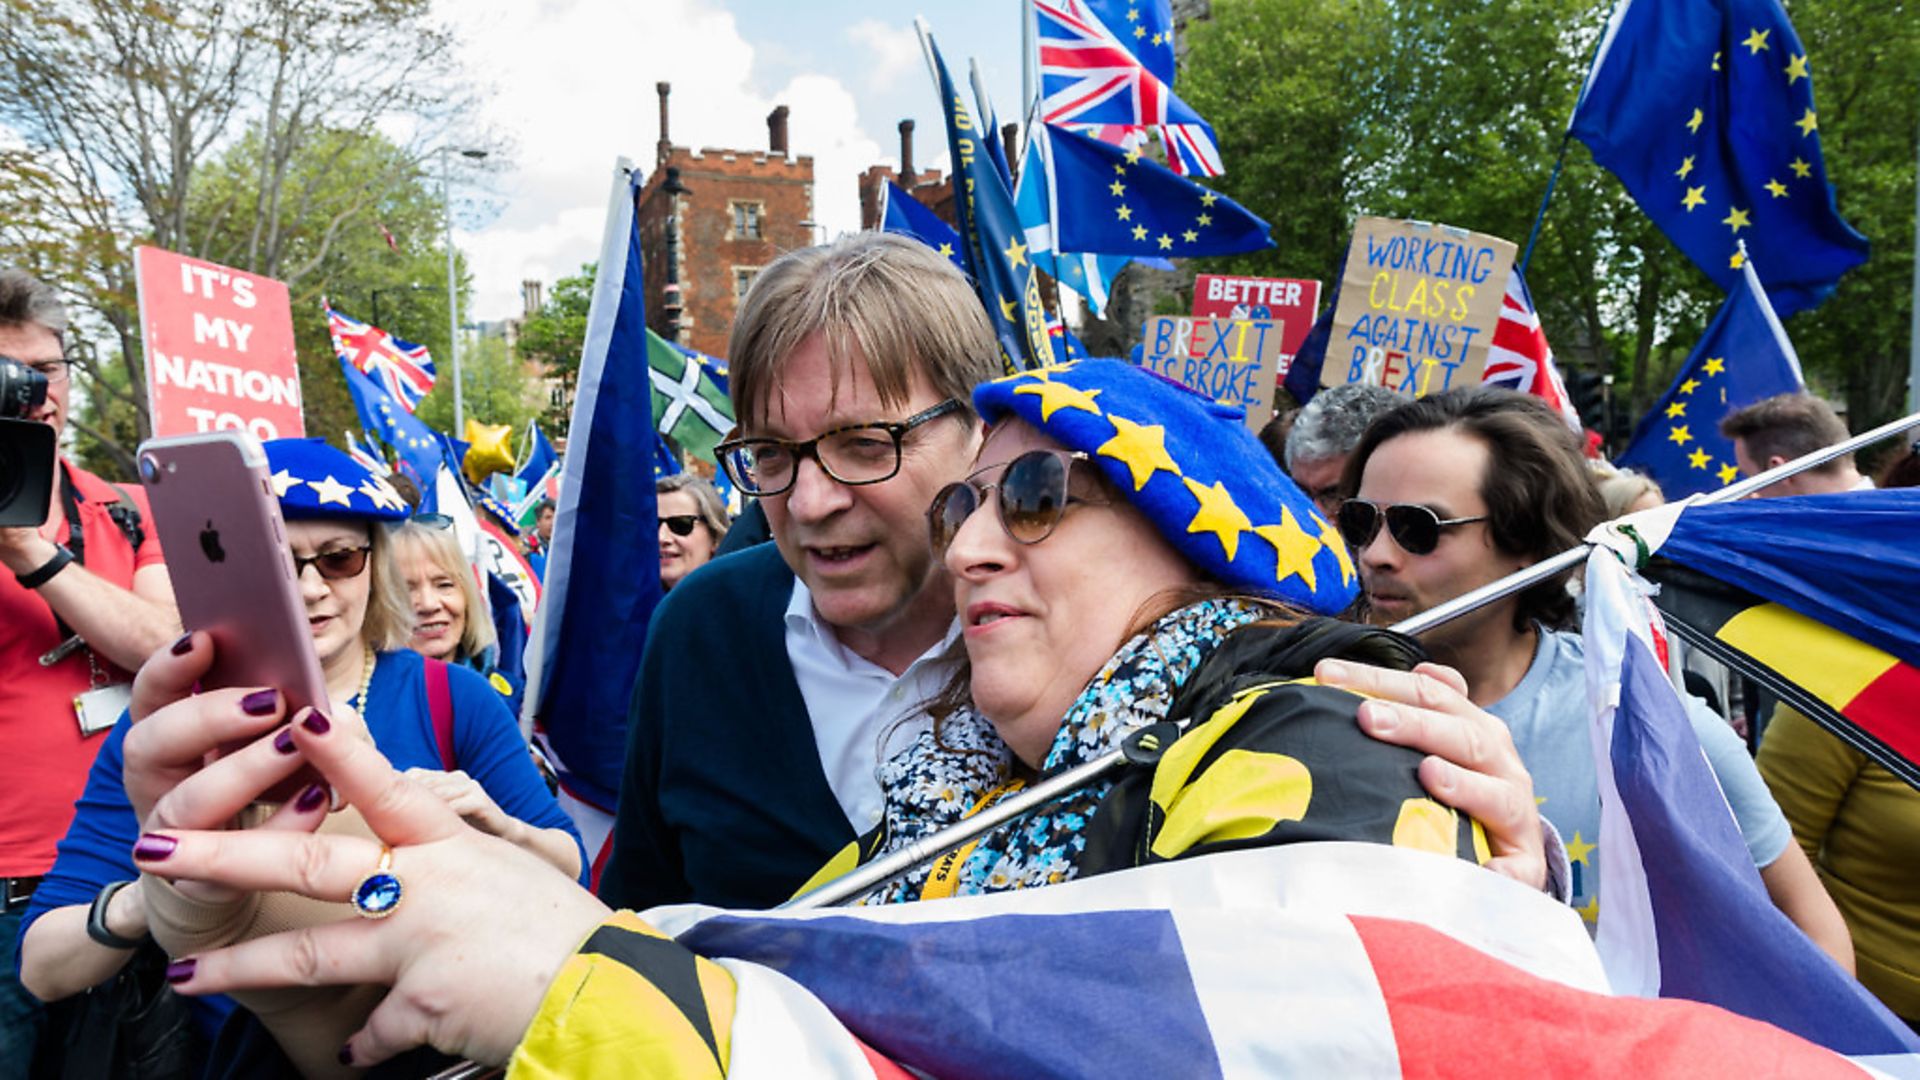 Guy Verhofstadt, European Parliament's chief Brexit negotiator, poses for a selfie as he joins a group of pro-EU supporters protesting against Brexit. (Wiktor Szymanowicz / Barcroft Media via Getty Images) - Credit: Barcroft Media via Getty Images